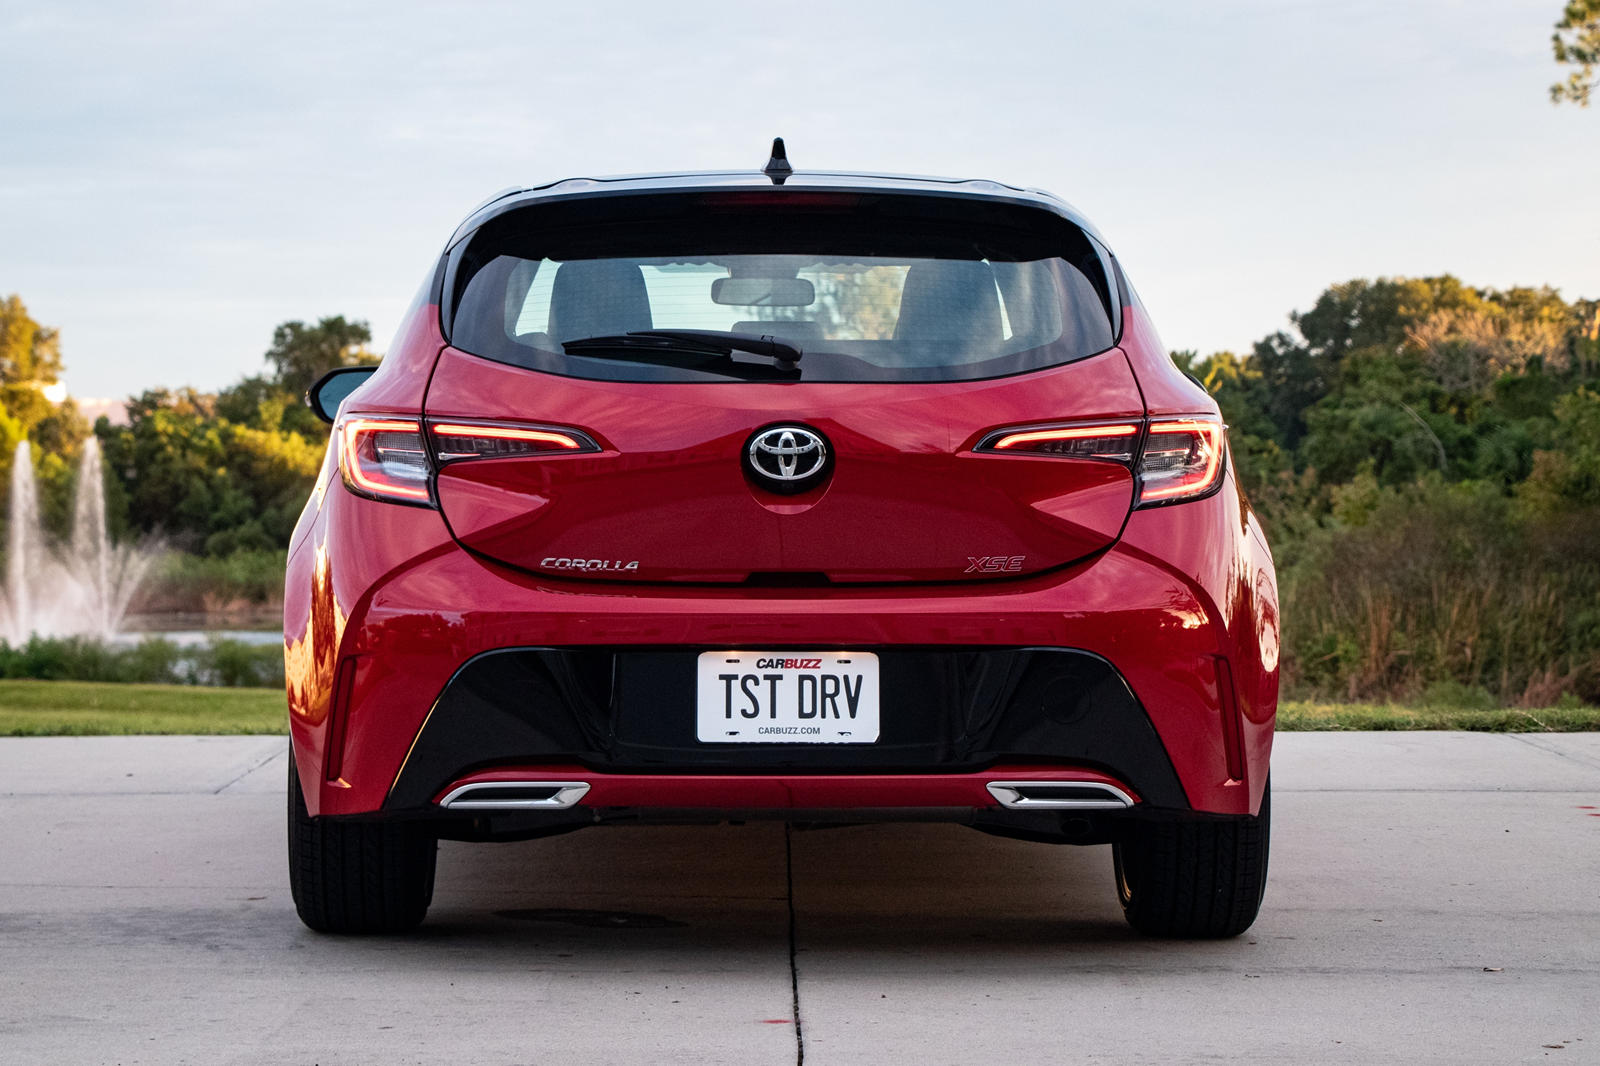 2021 Toyota Corolla Hatchback: Review, Trims, Specs, Price, New ...